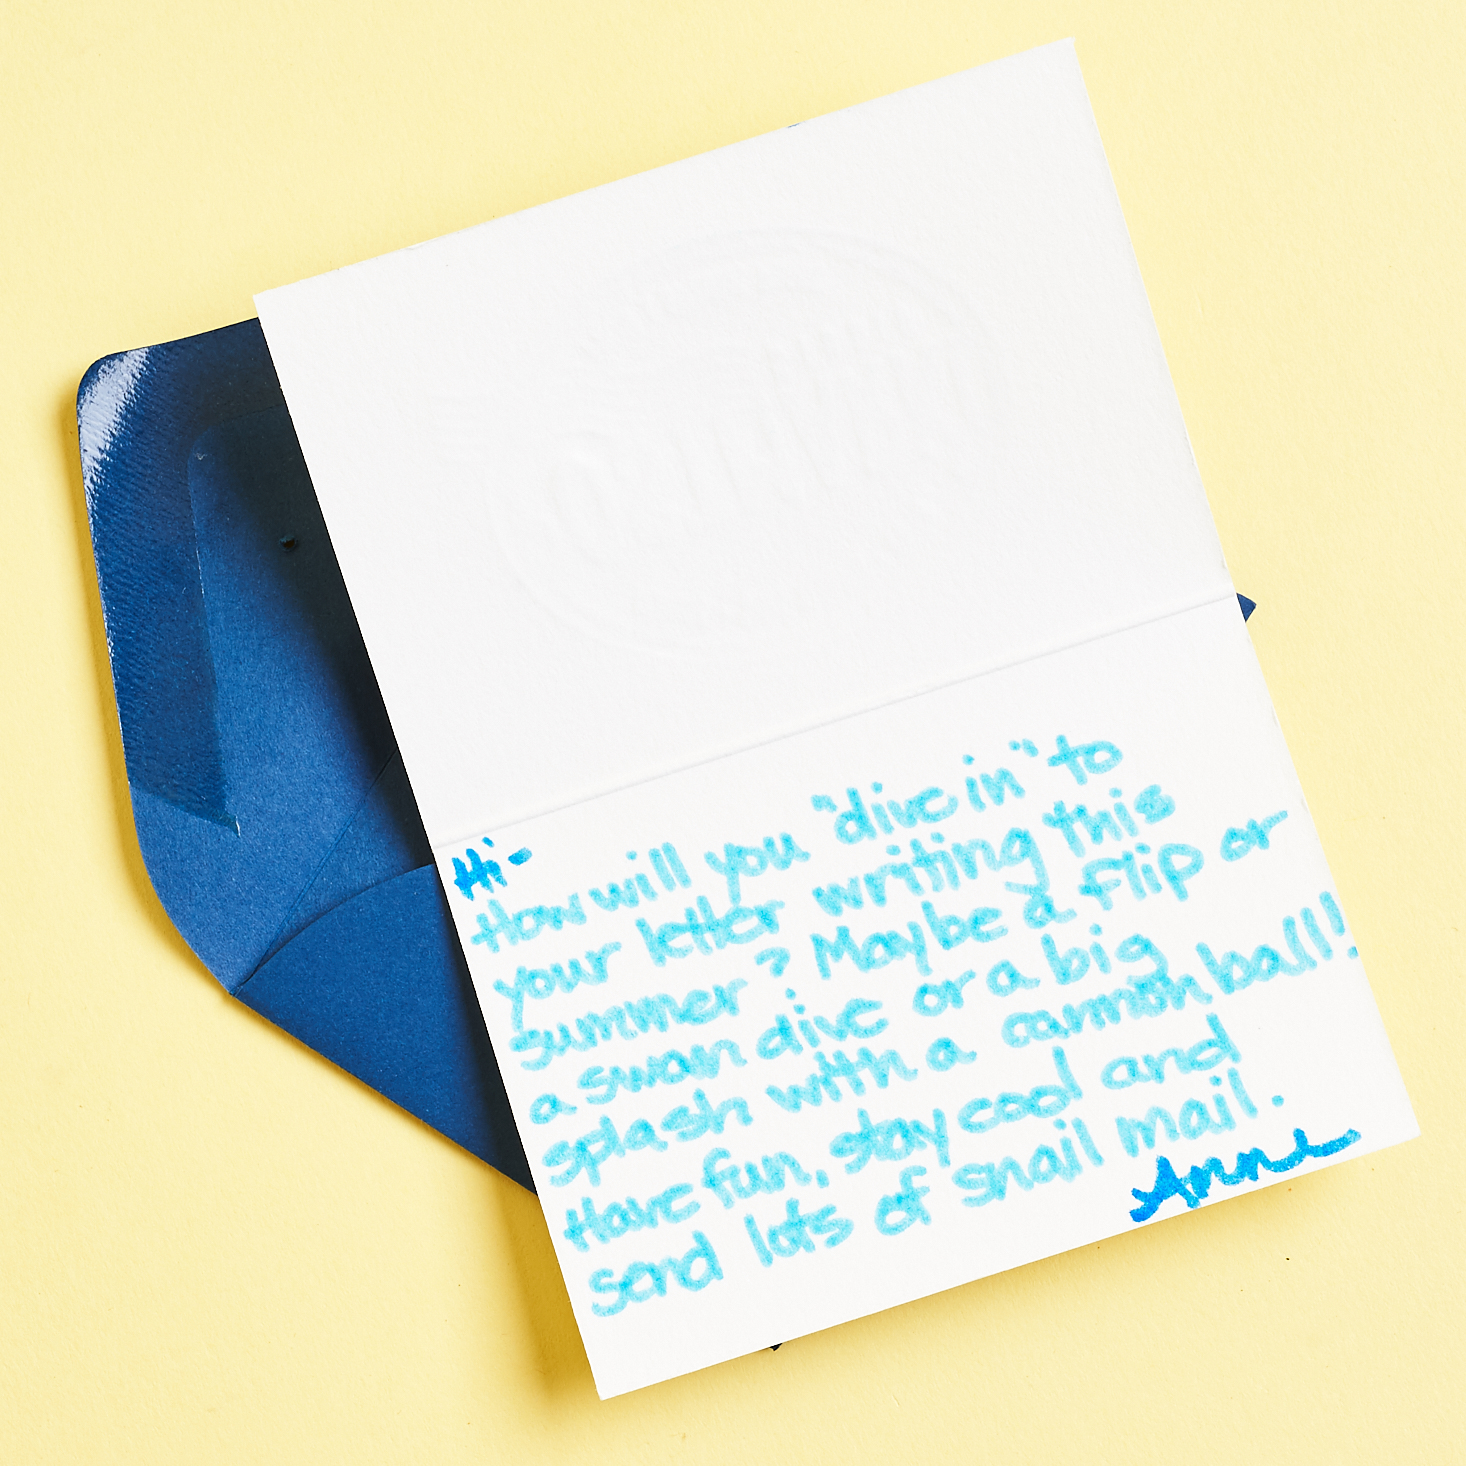 note from Anne in blue ink